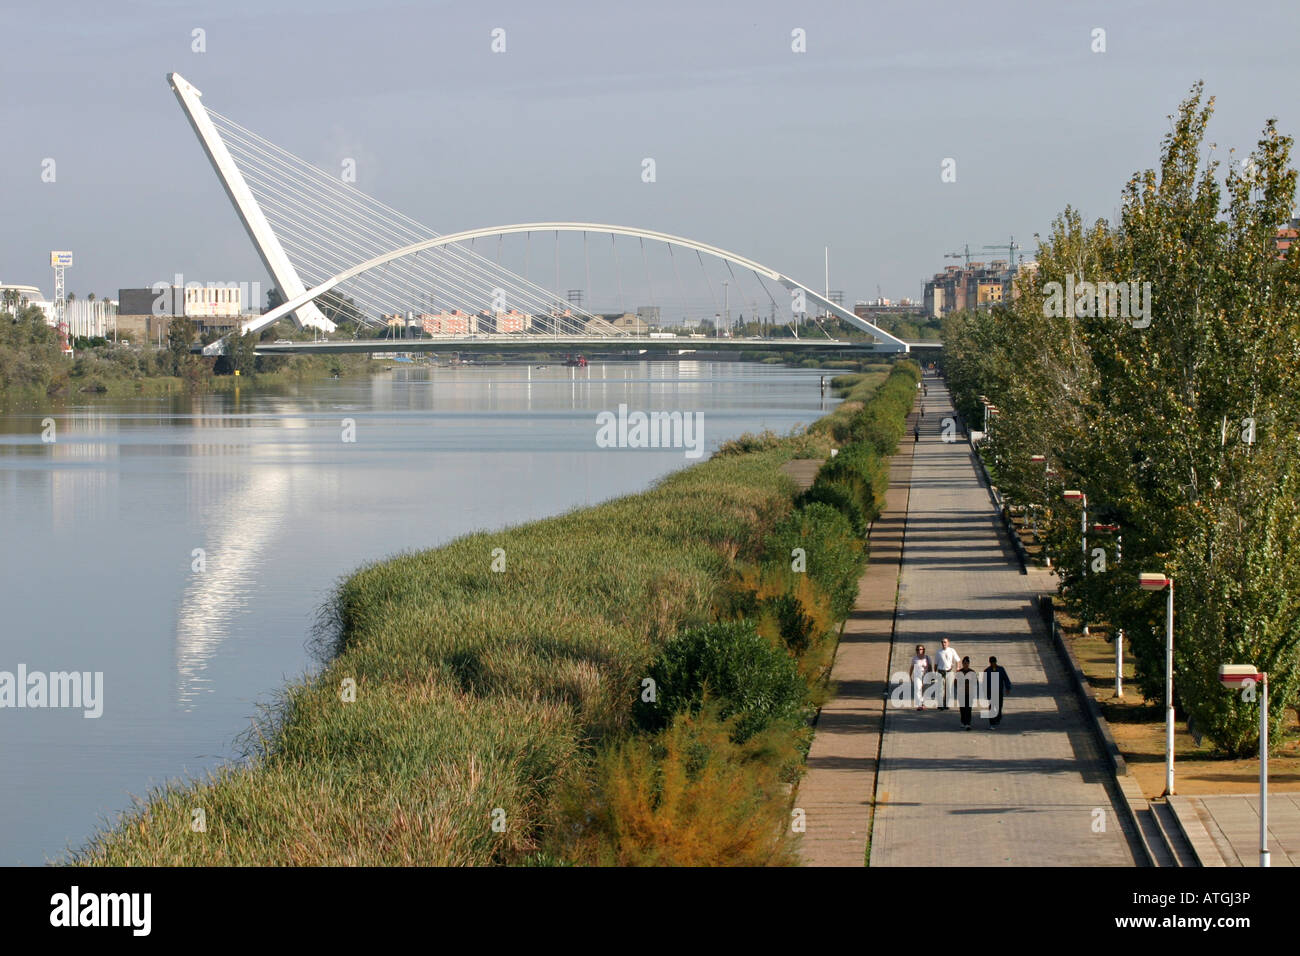 Seville Bridges. Two modern bridges over the Meandro San Jeronimo River join to make a sculptural form Stock Photo